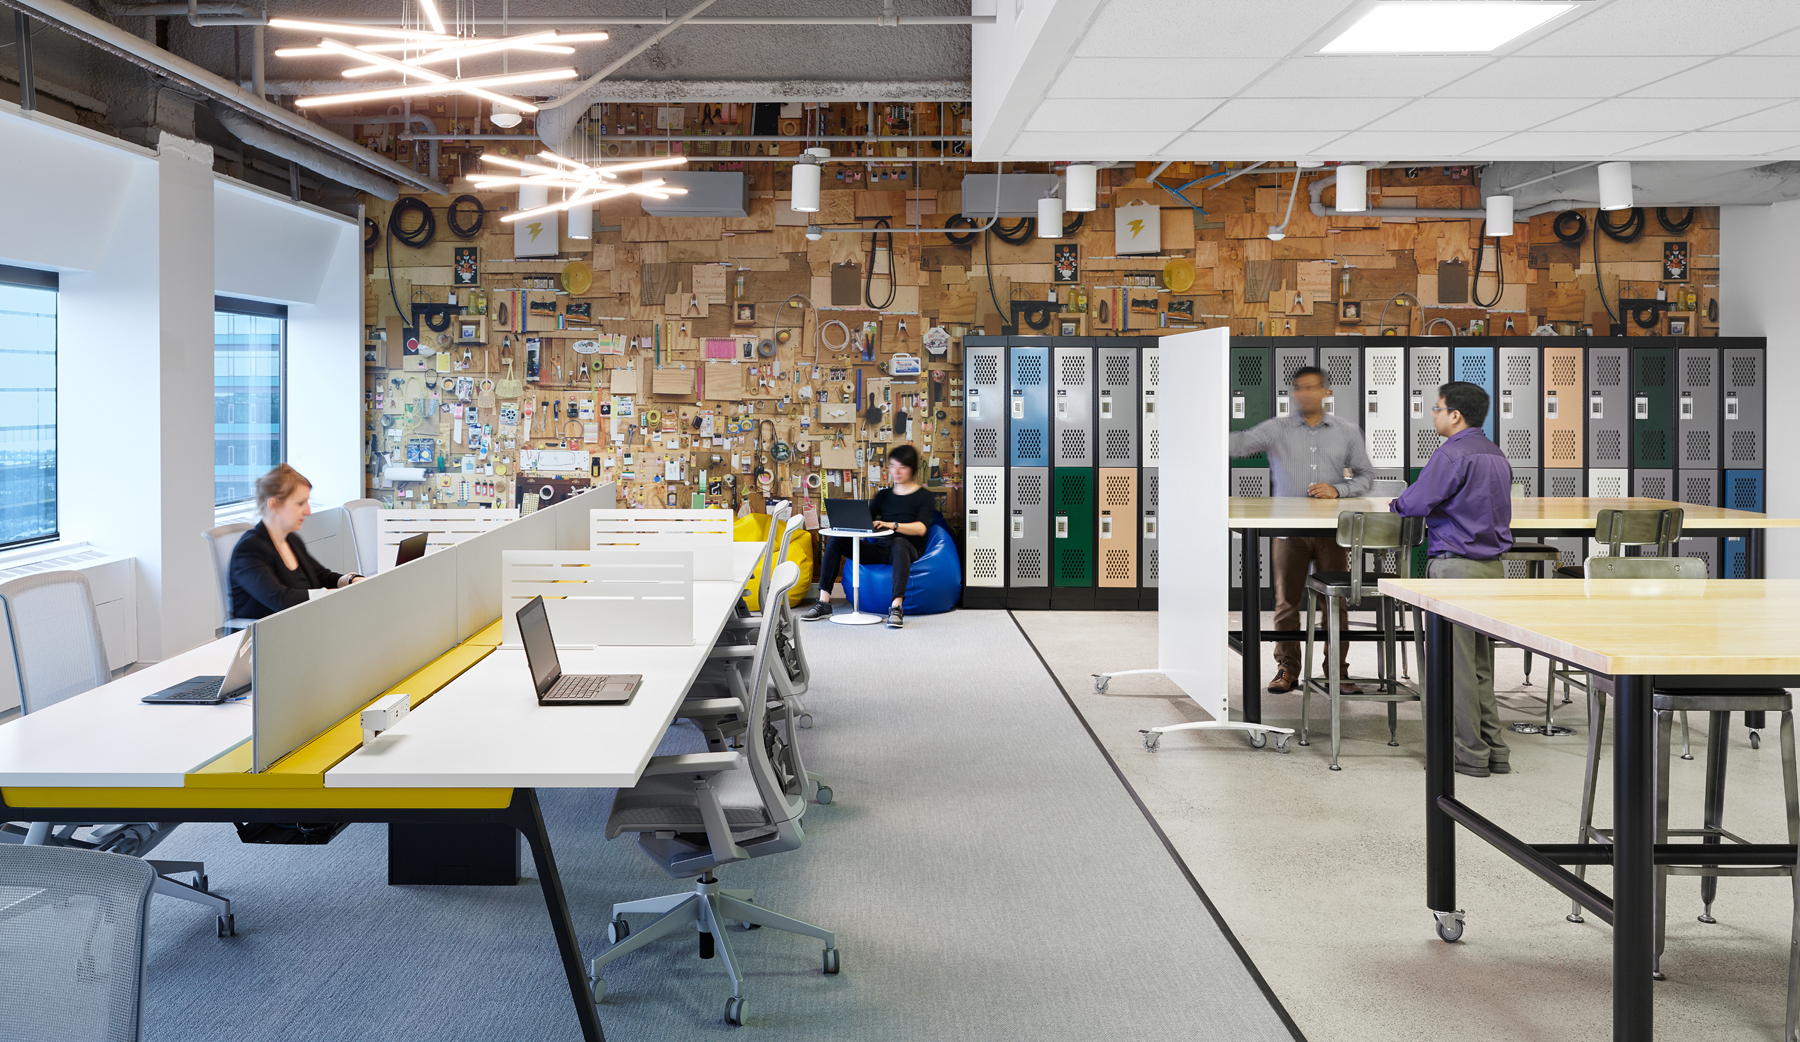 AVIVA Digital Garage workstations with lockers on back wall and decorative wall covered in craft supplies